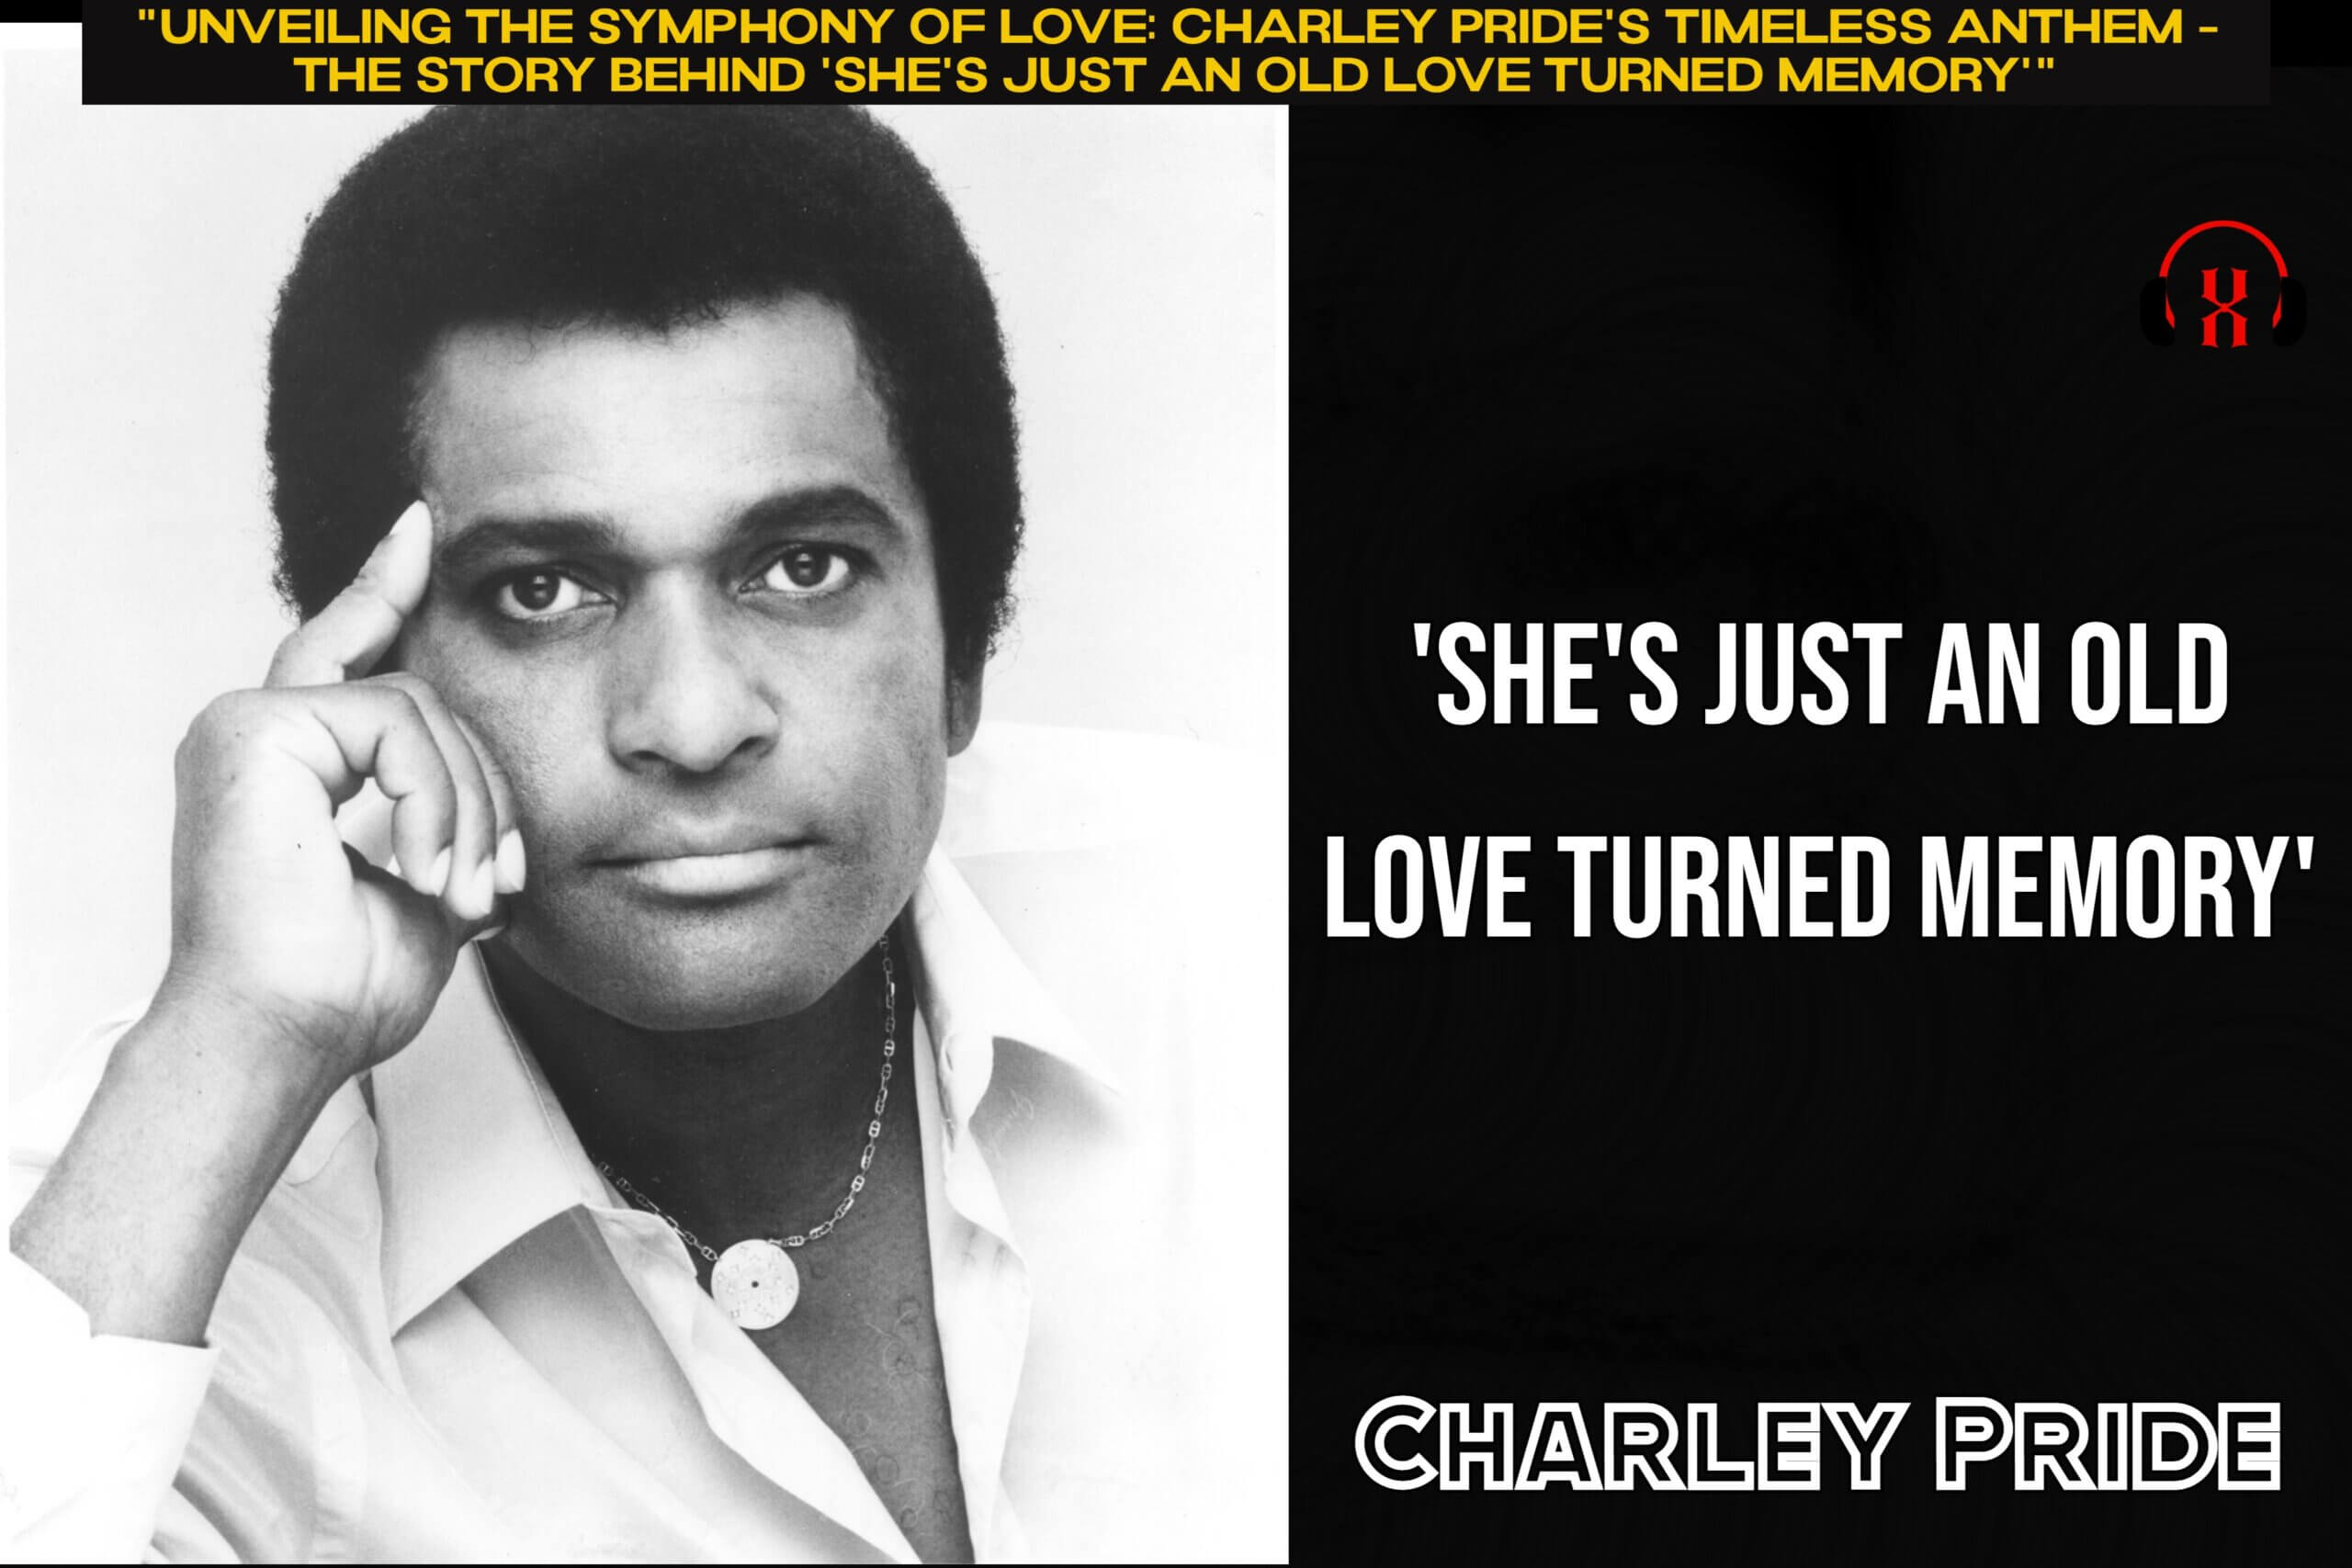 “Unveiling the Symphony of Love: Charley Pride’s Timeless Anthem – The Story Behind ‘She’s Just an Old Love Turned Memory'”